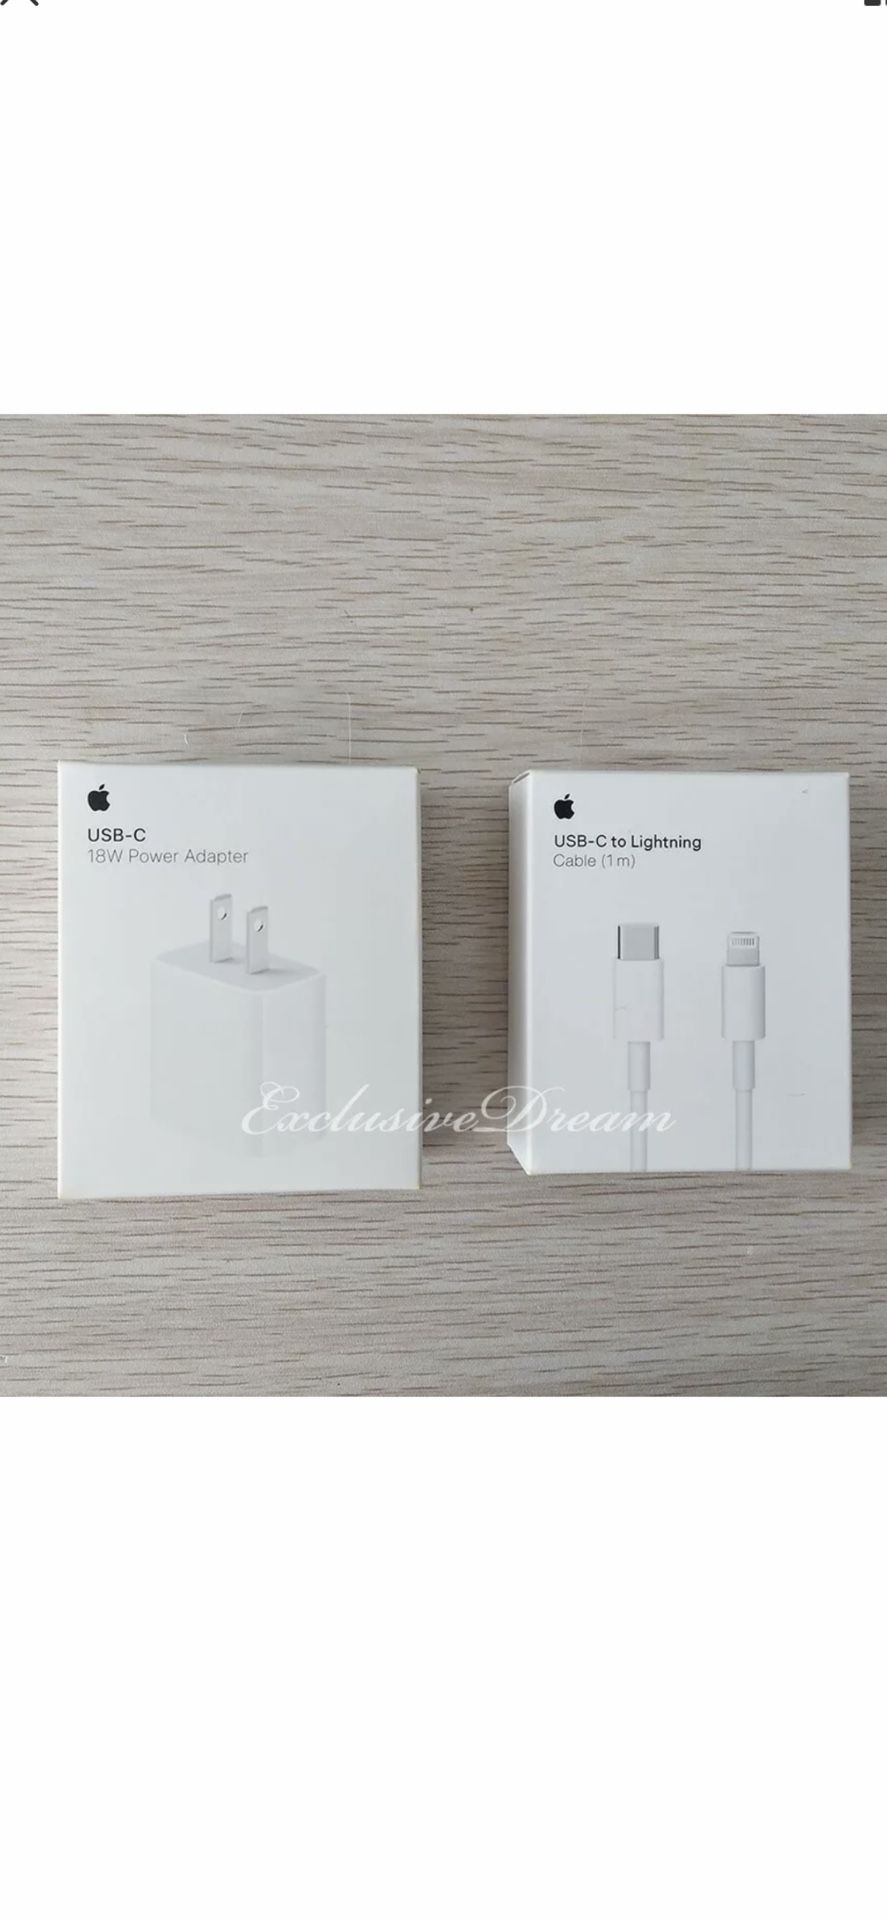 Brand New Original Apple iPhone fast charger set 18 wats for iPhone 11 and iPad